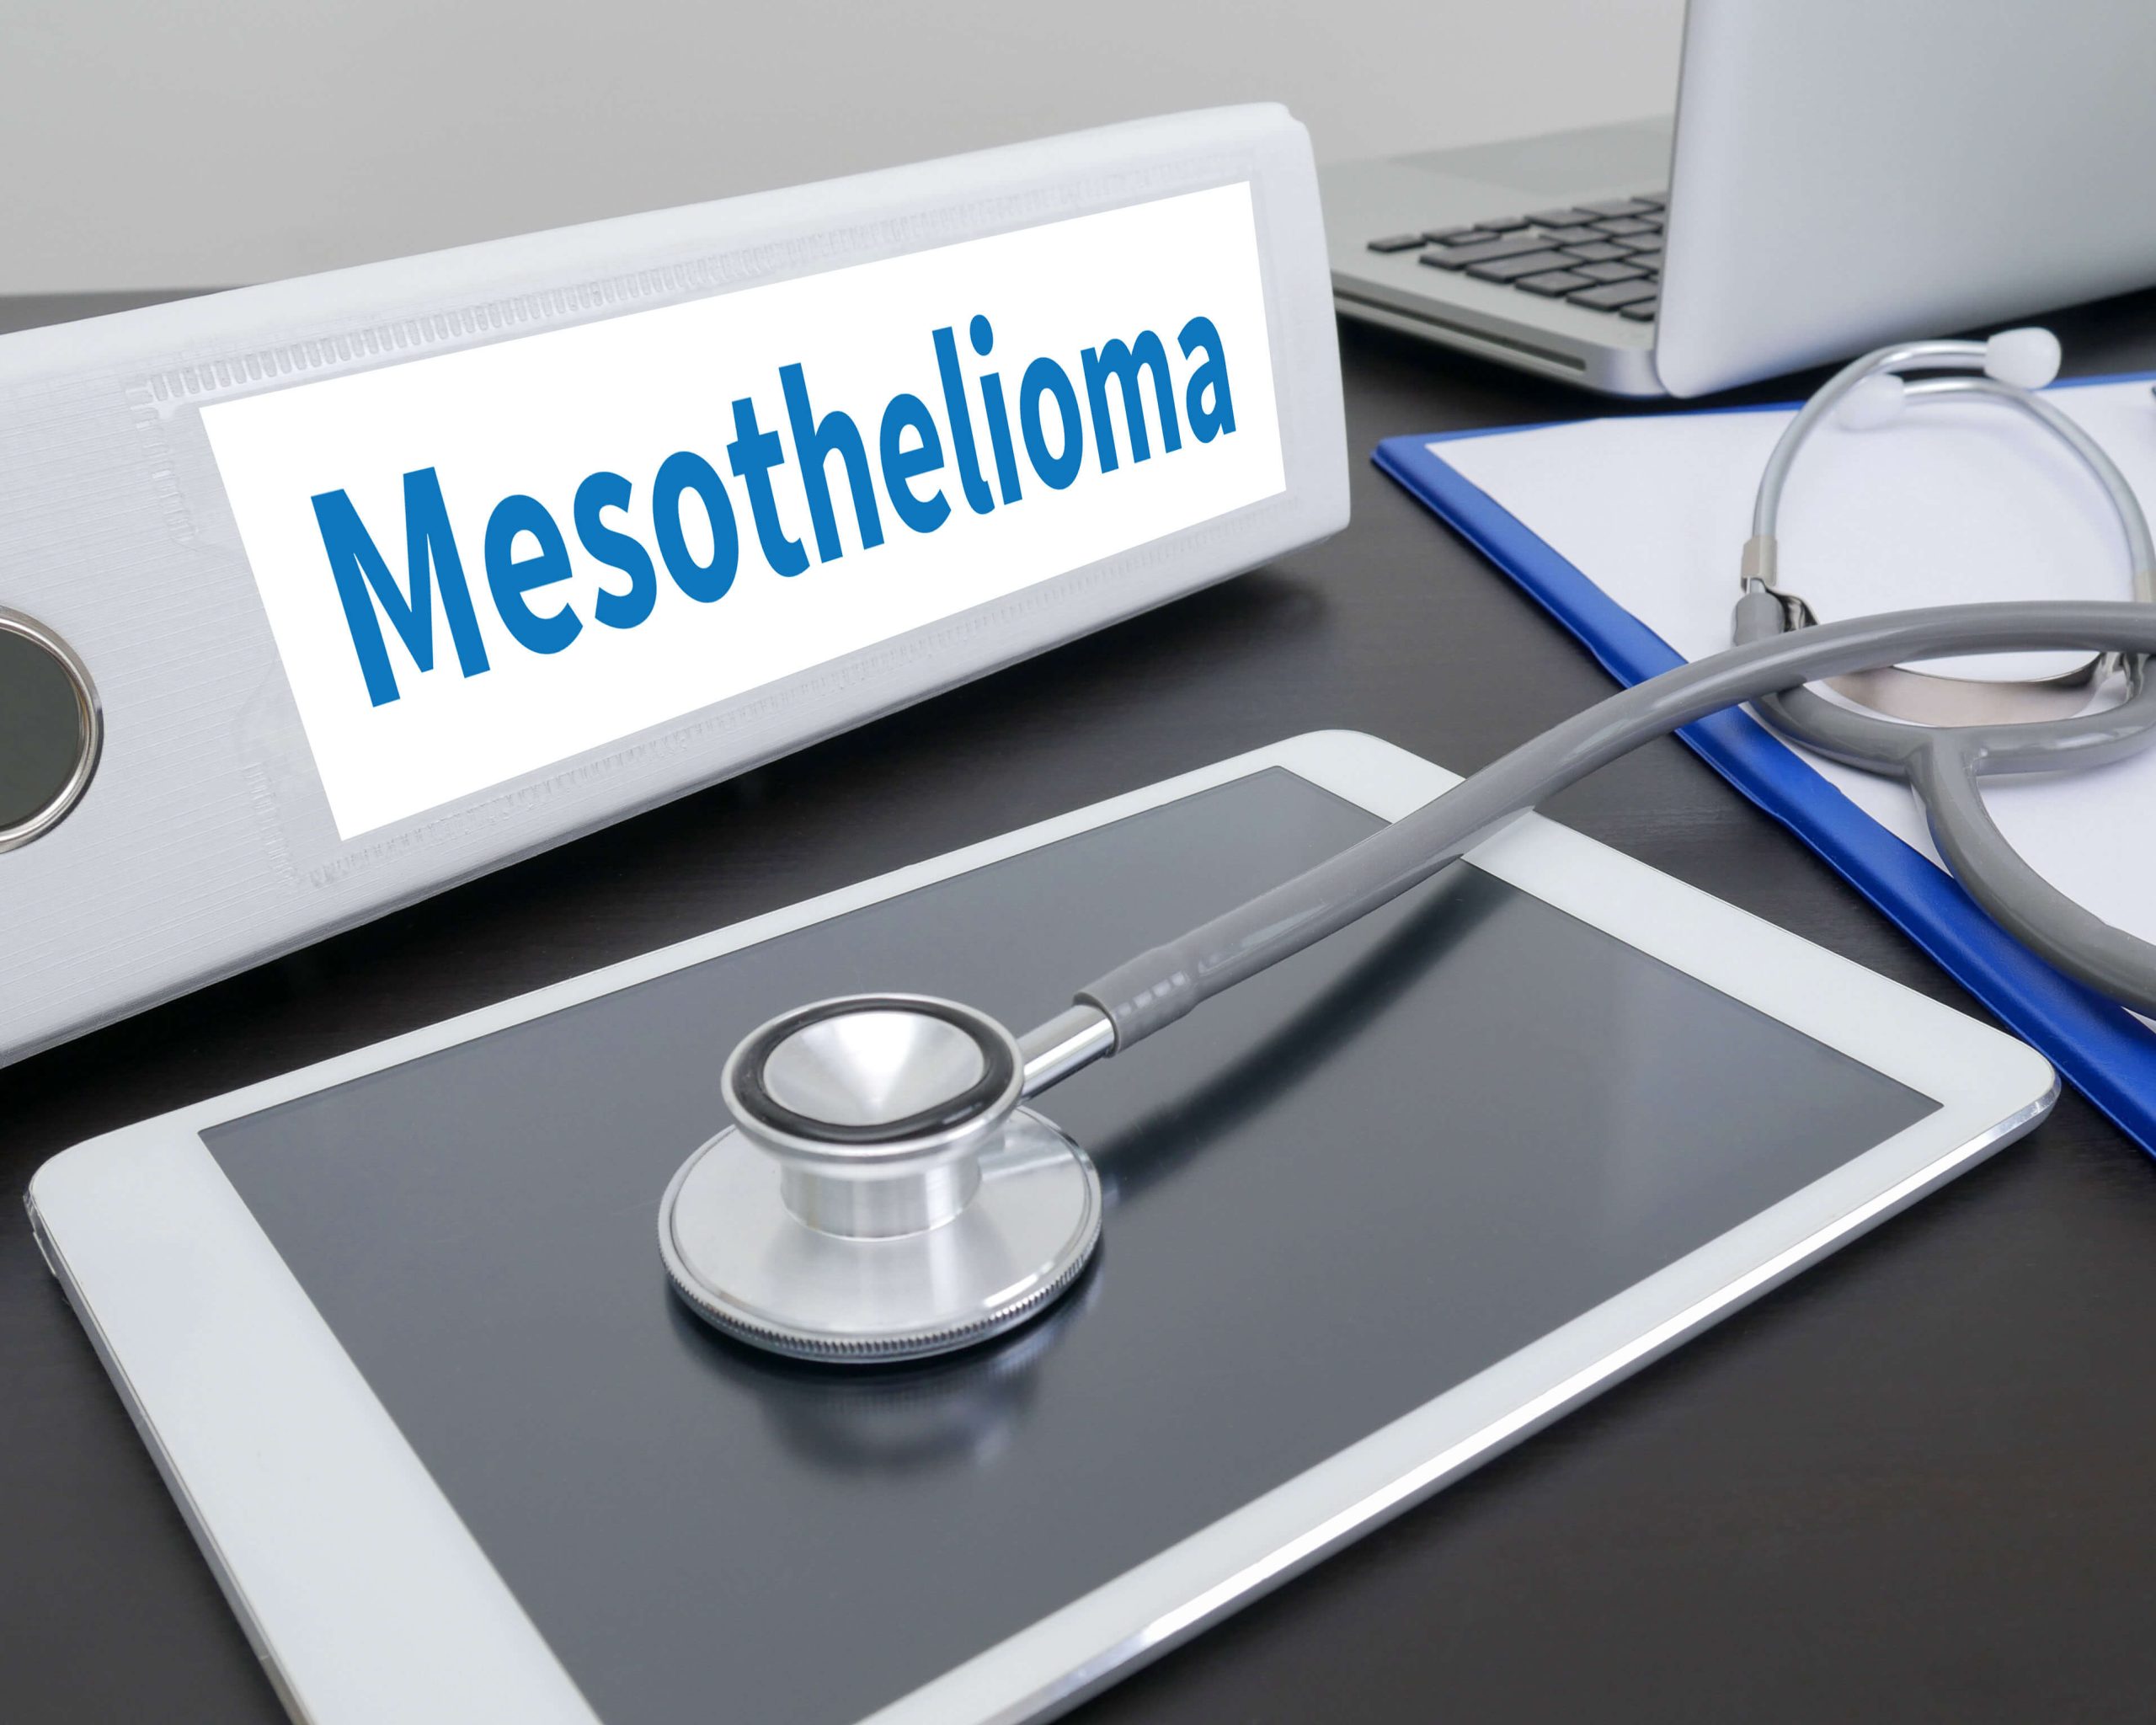 Stages-of-Mesothelioma in Los Angeles